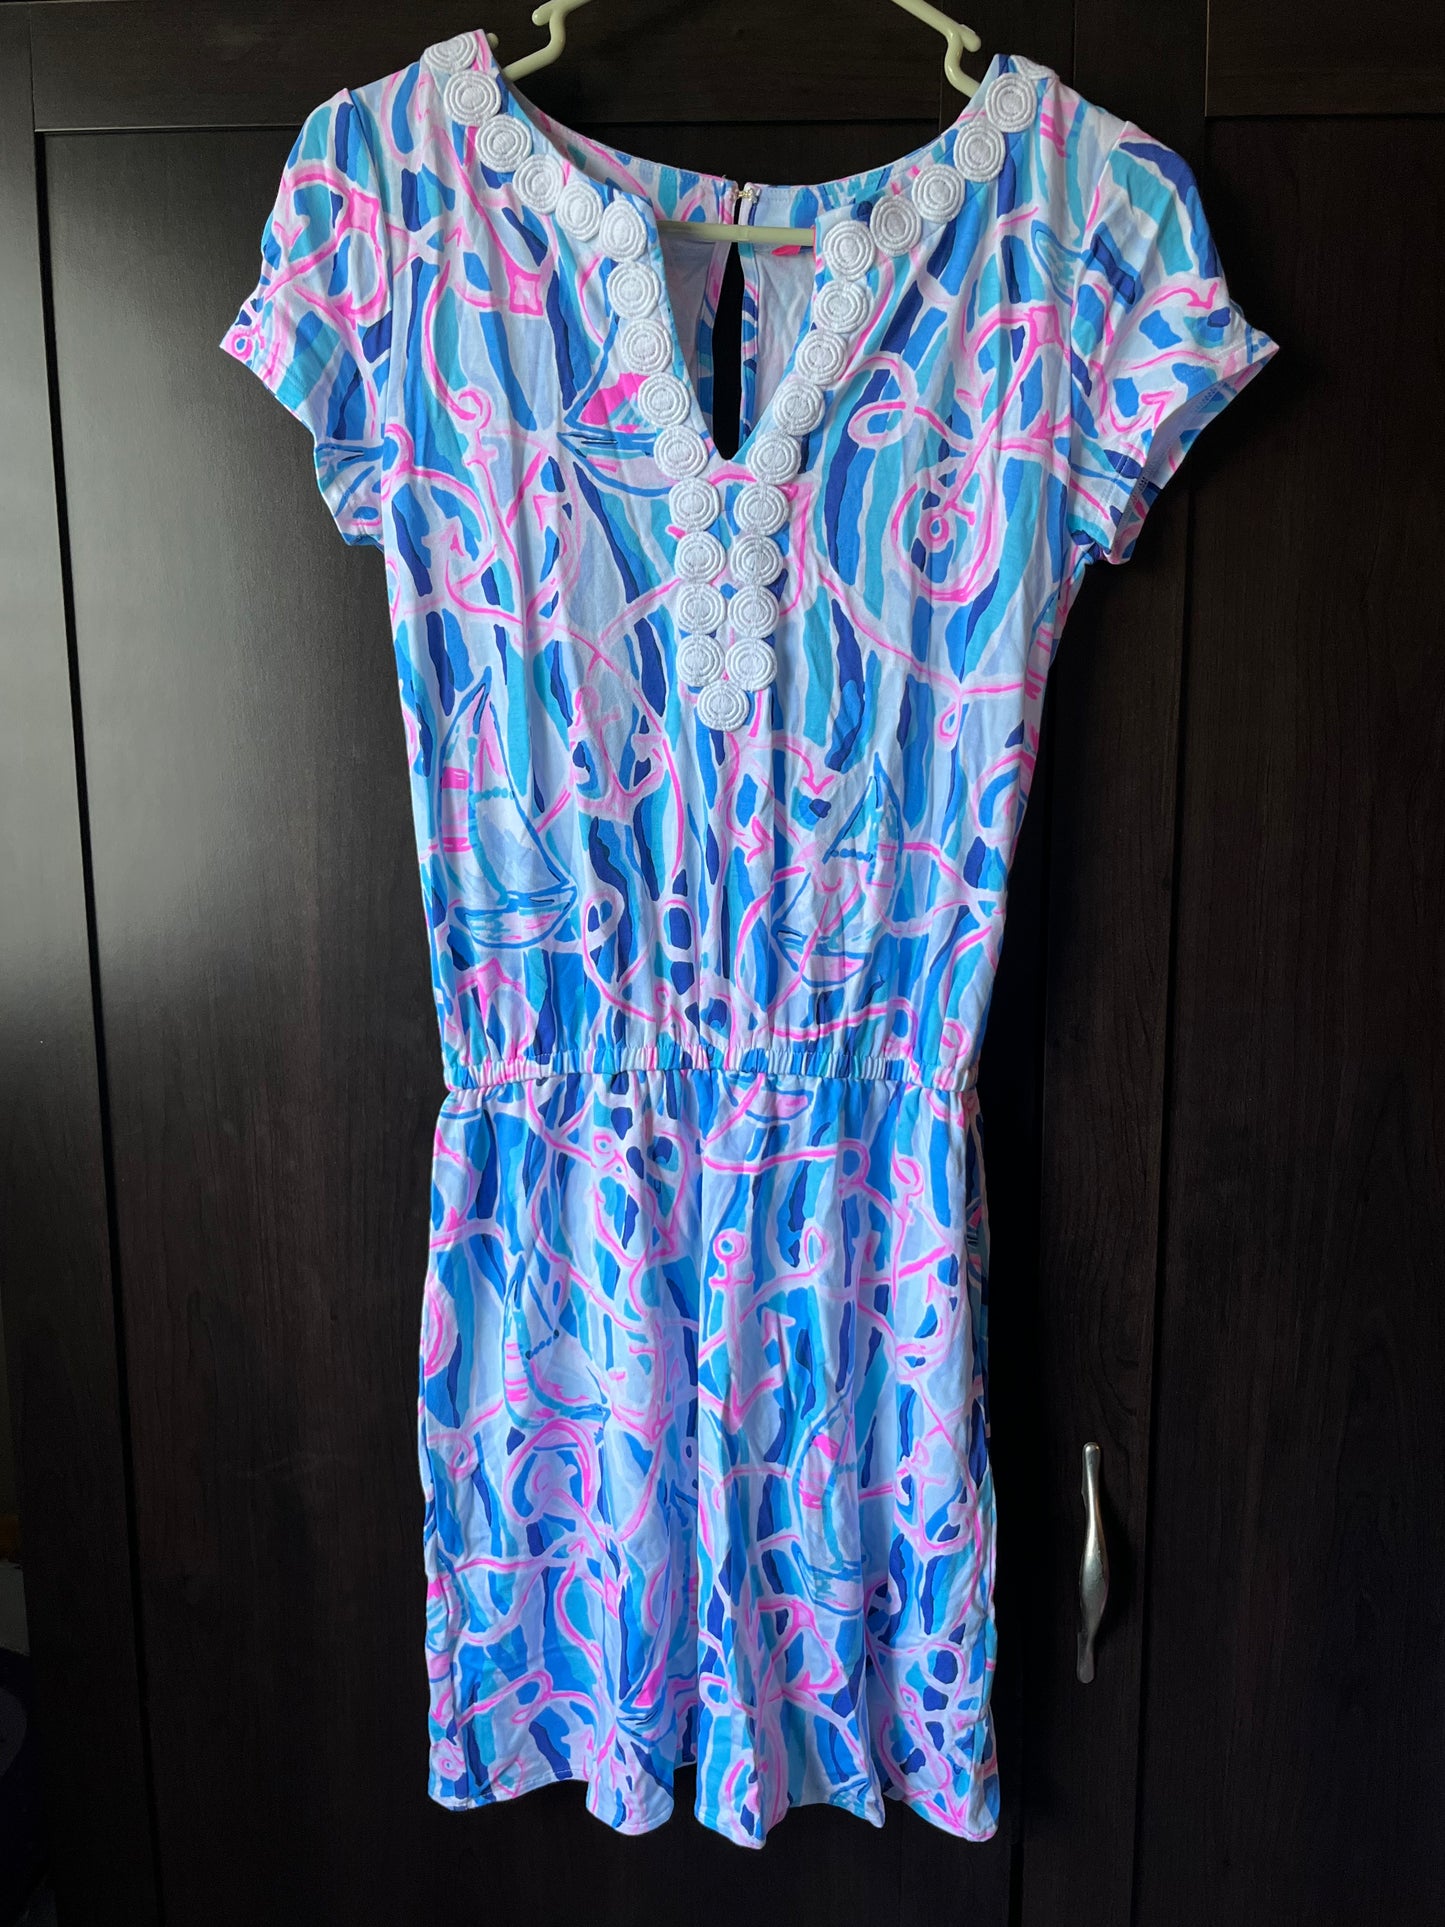 Lilly Pulitzer xs romper blue white pink